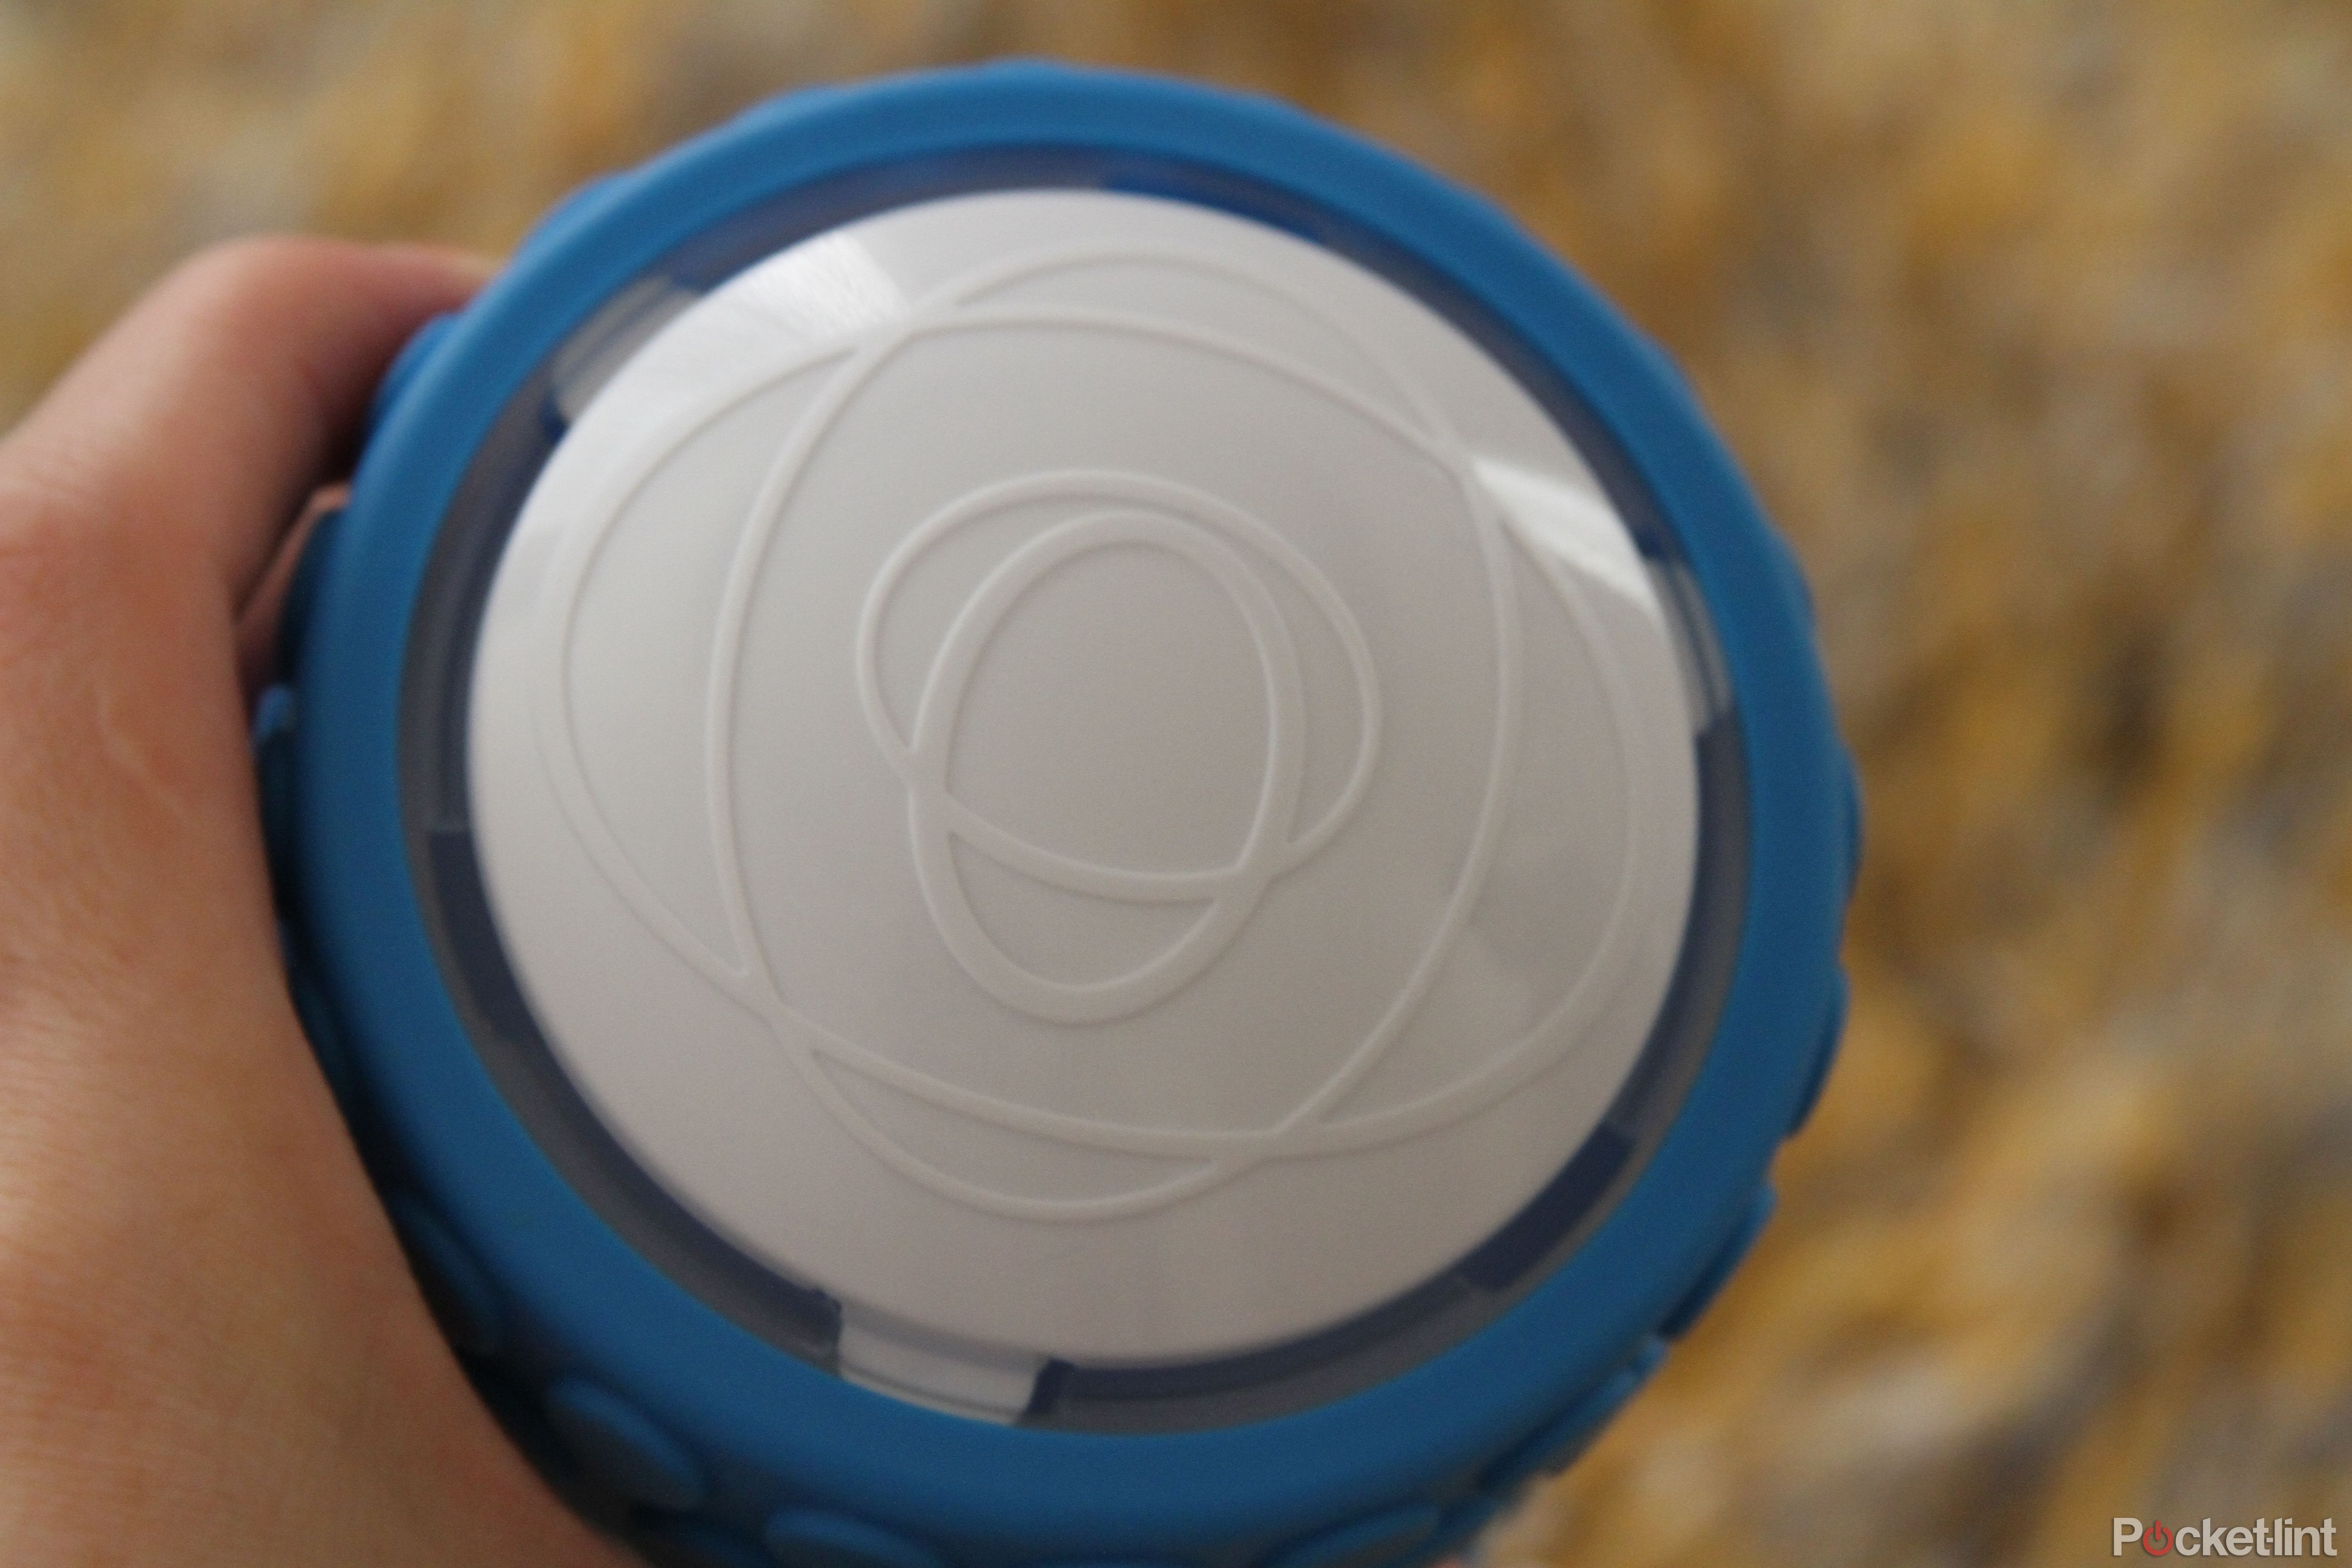 Sphero Ollie hands-on review: Cylindrical, fast, and totally cool